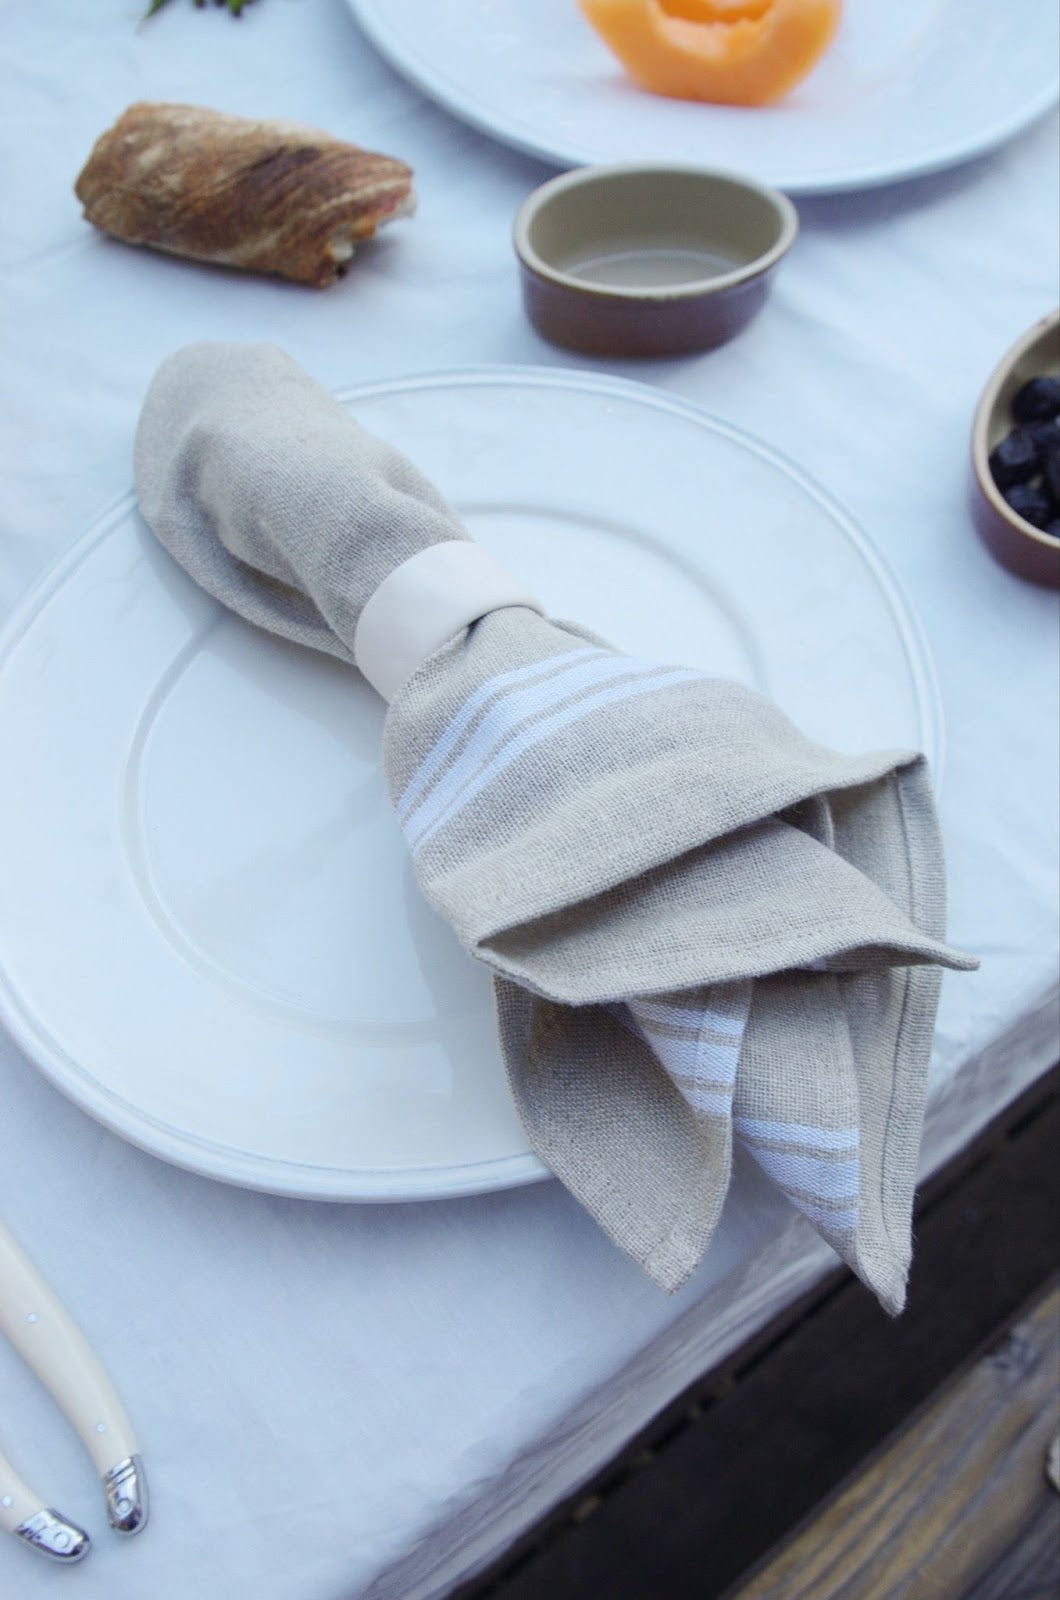 Linen napkin with white stripes at hem on a plate next to bread, cutlery, and small bowls.